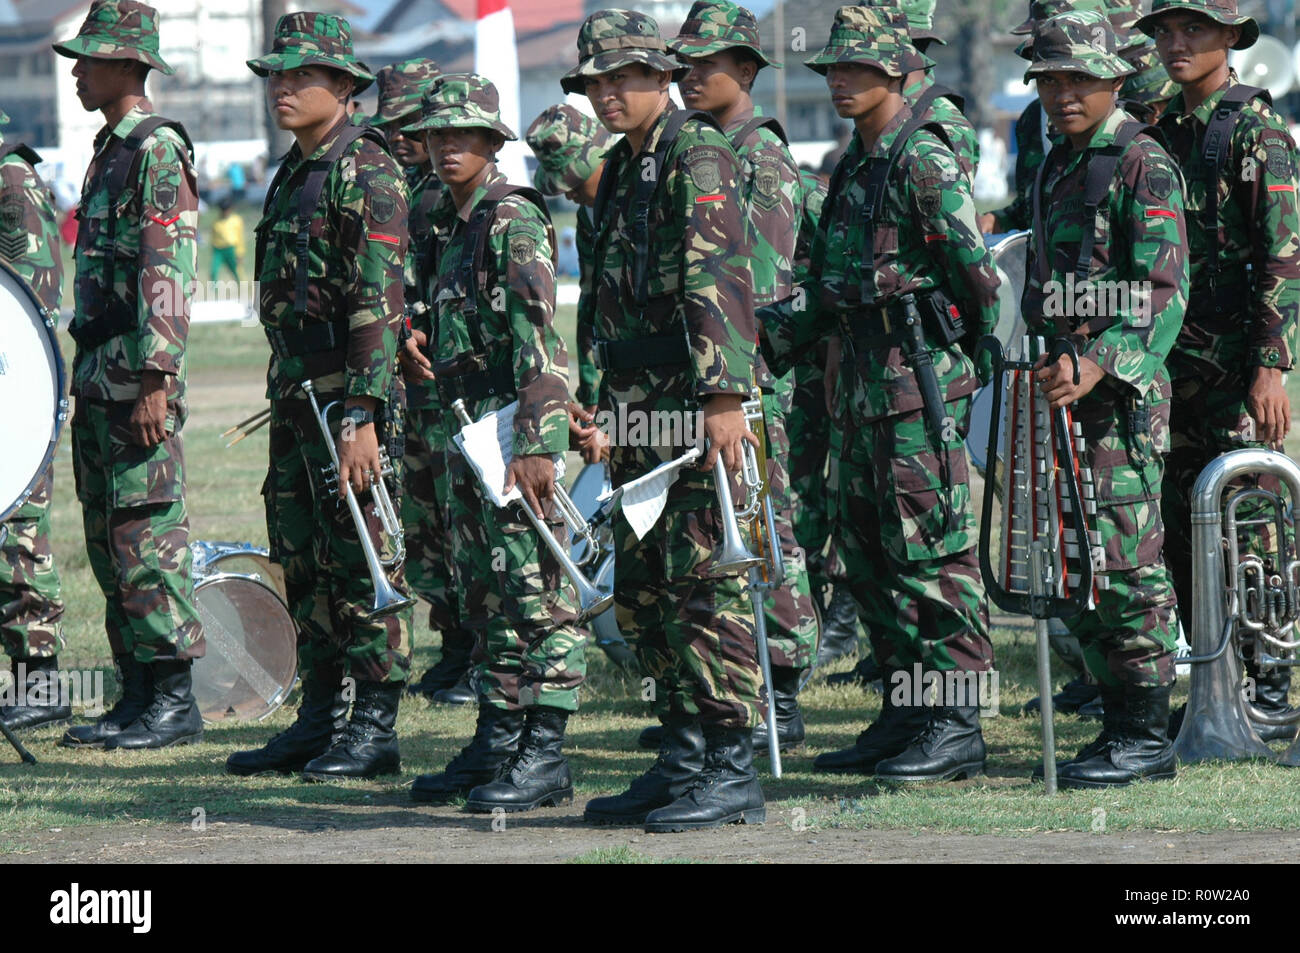 Banda Aceh, Indonesia - August 16, 2005: Indonesia military marching band at Indonesian Independence day celebration at Blangpadang, banda aceh Stock Photo